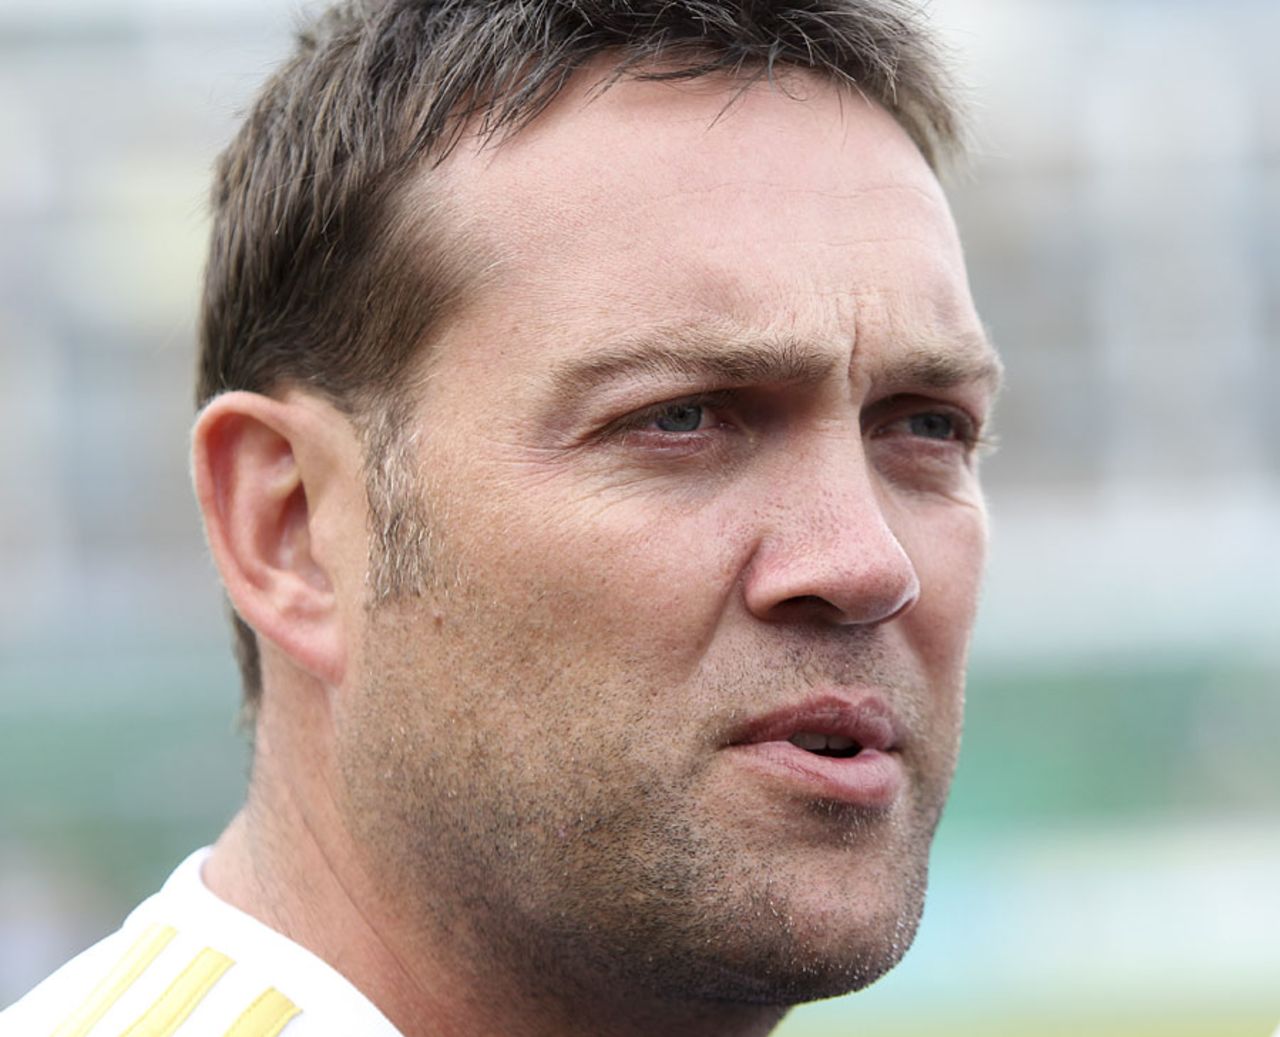 Jacques Kallis spent time at the hospital with Boucher, Somerset v South Africans, Tour match, Taunton, 2nd day, July 10, 2012